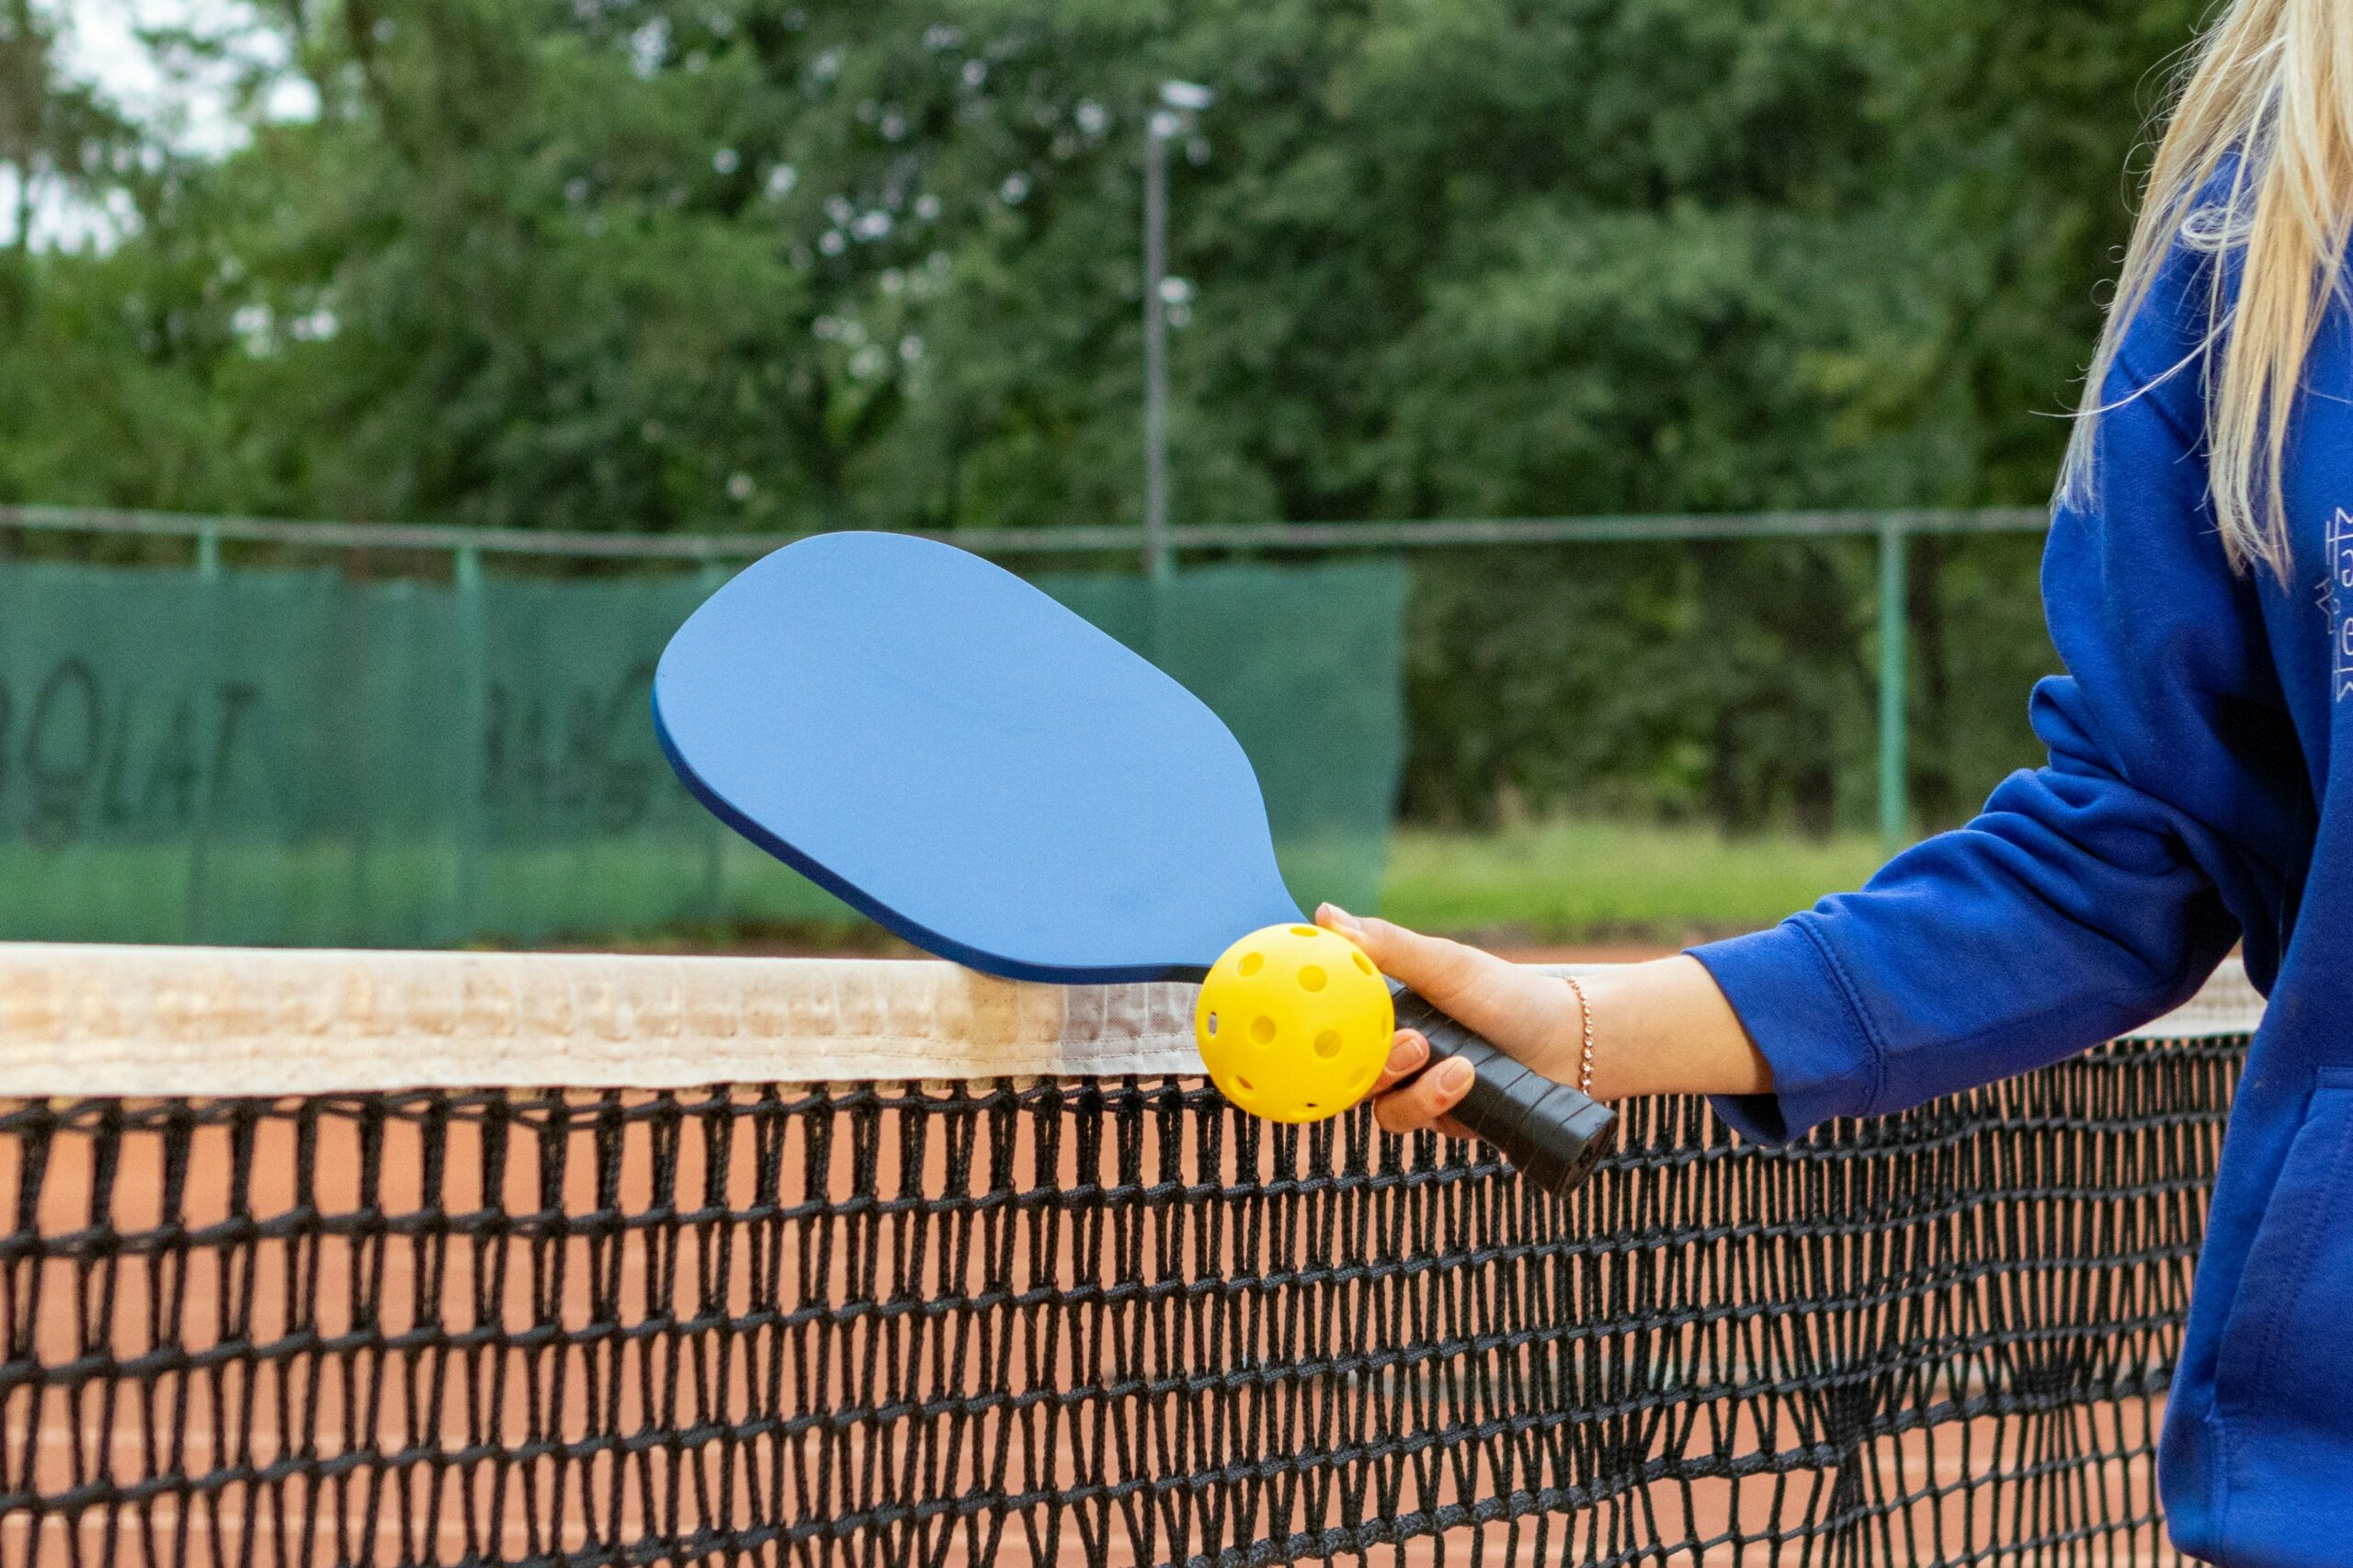 Person holding pickleball paddle and ball over a net